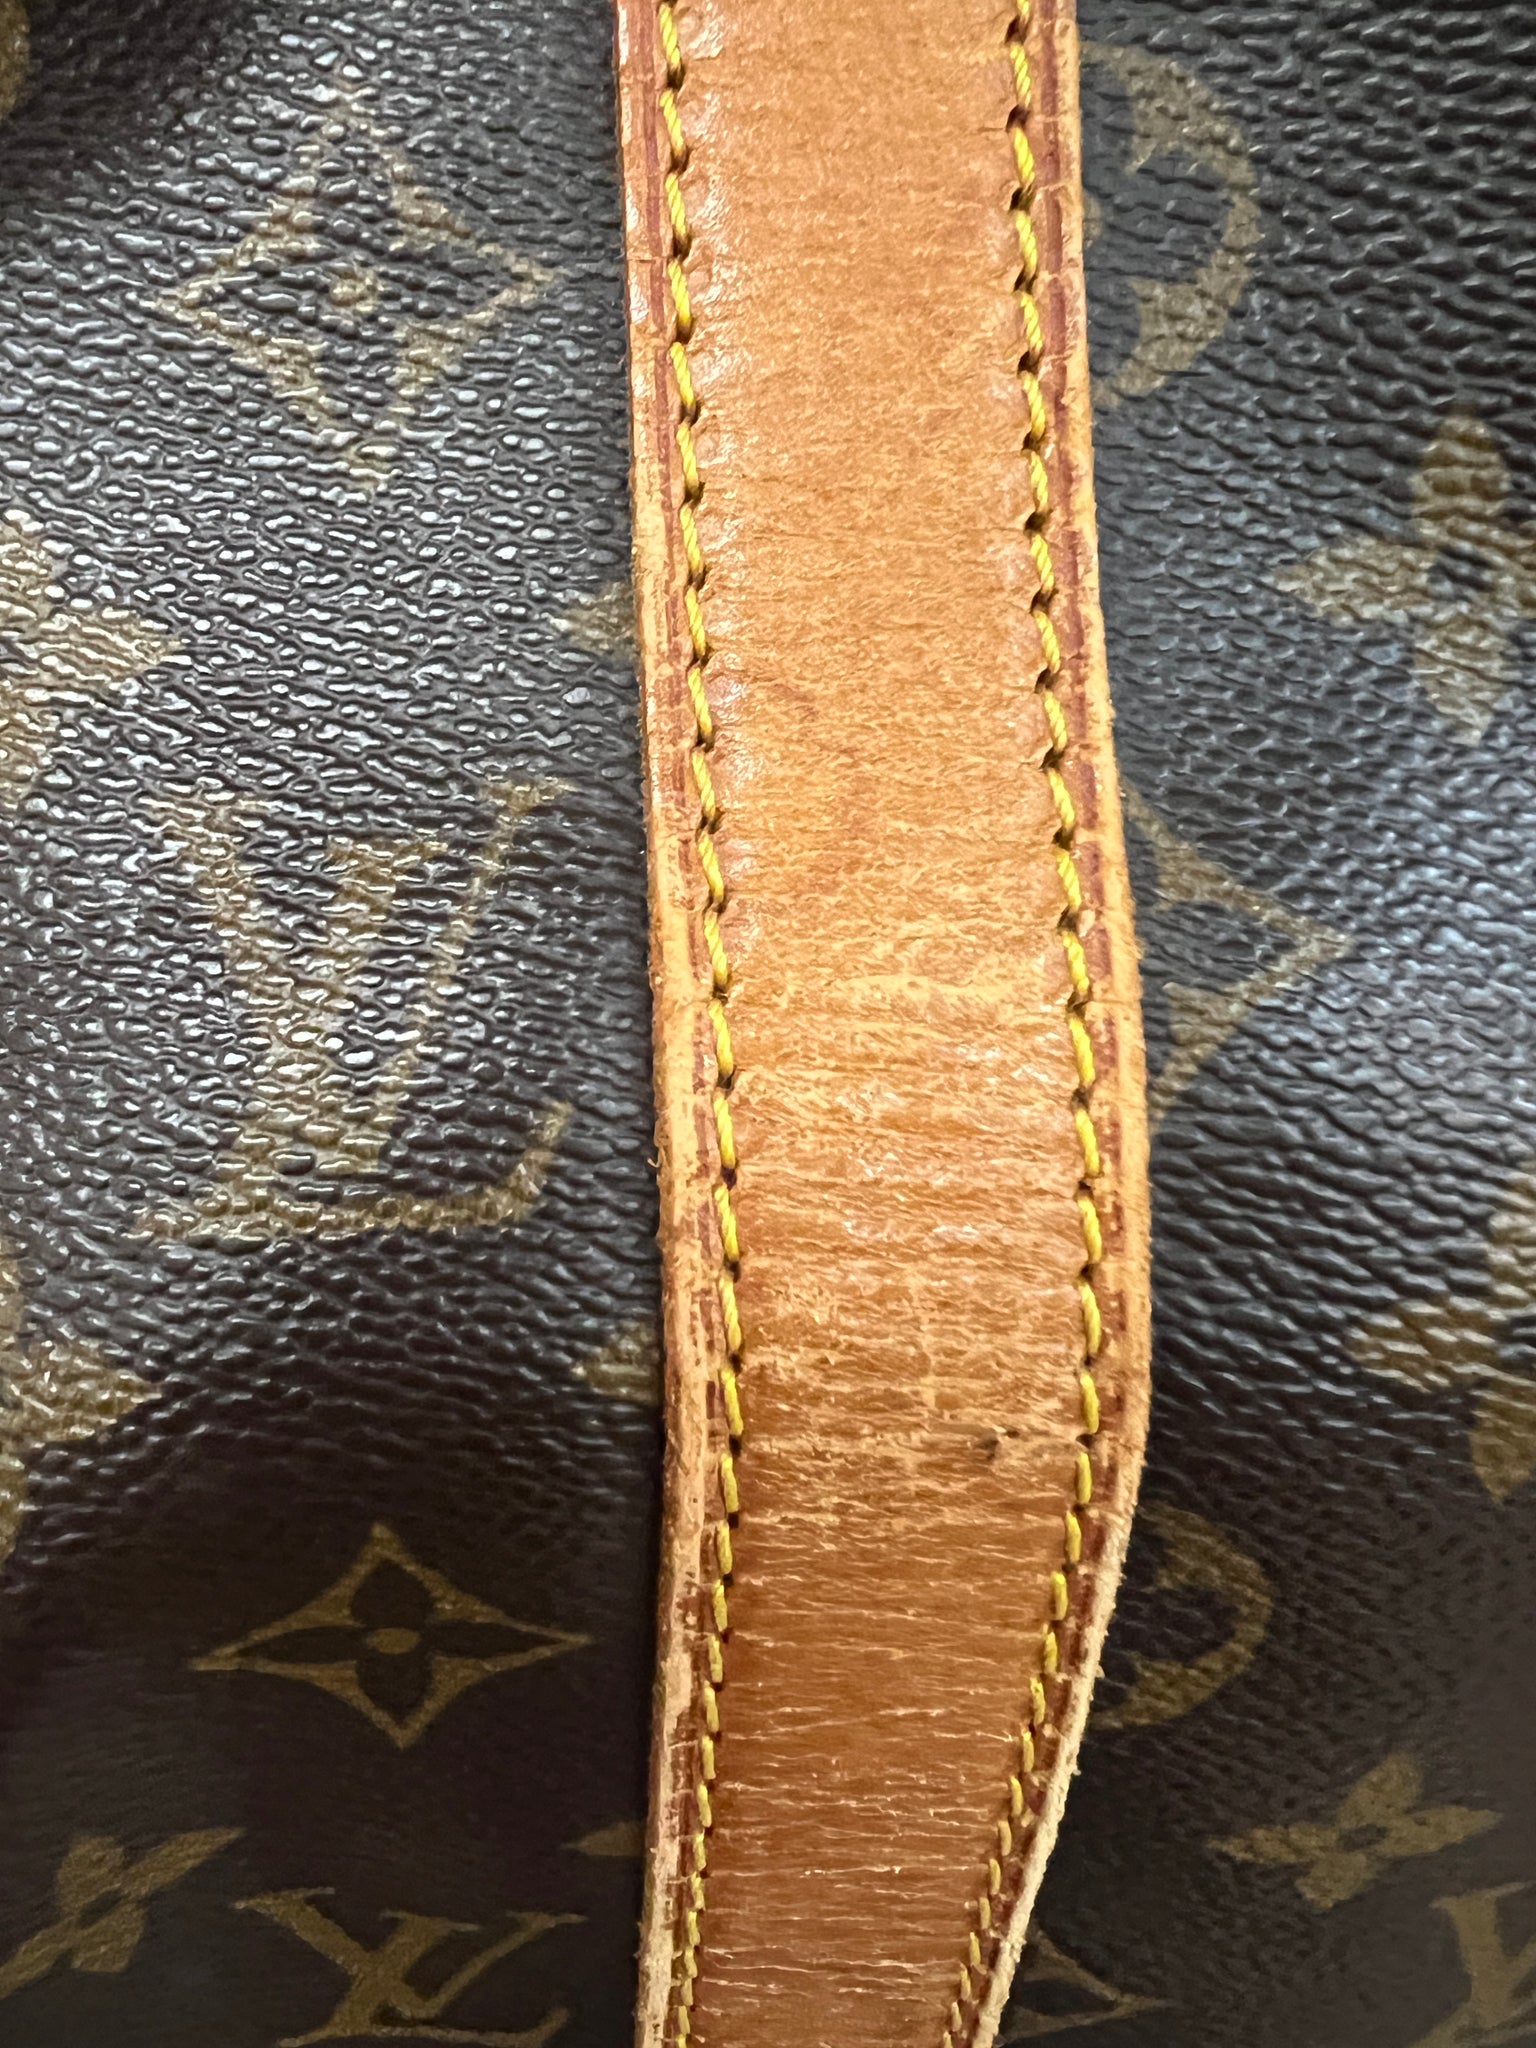 Keepall Bandoulière 50 - does anyone use it as their carry-on on